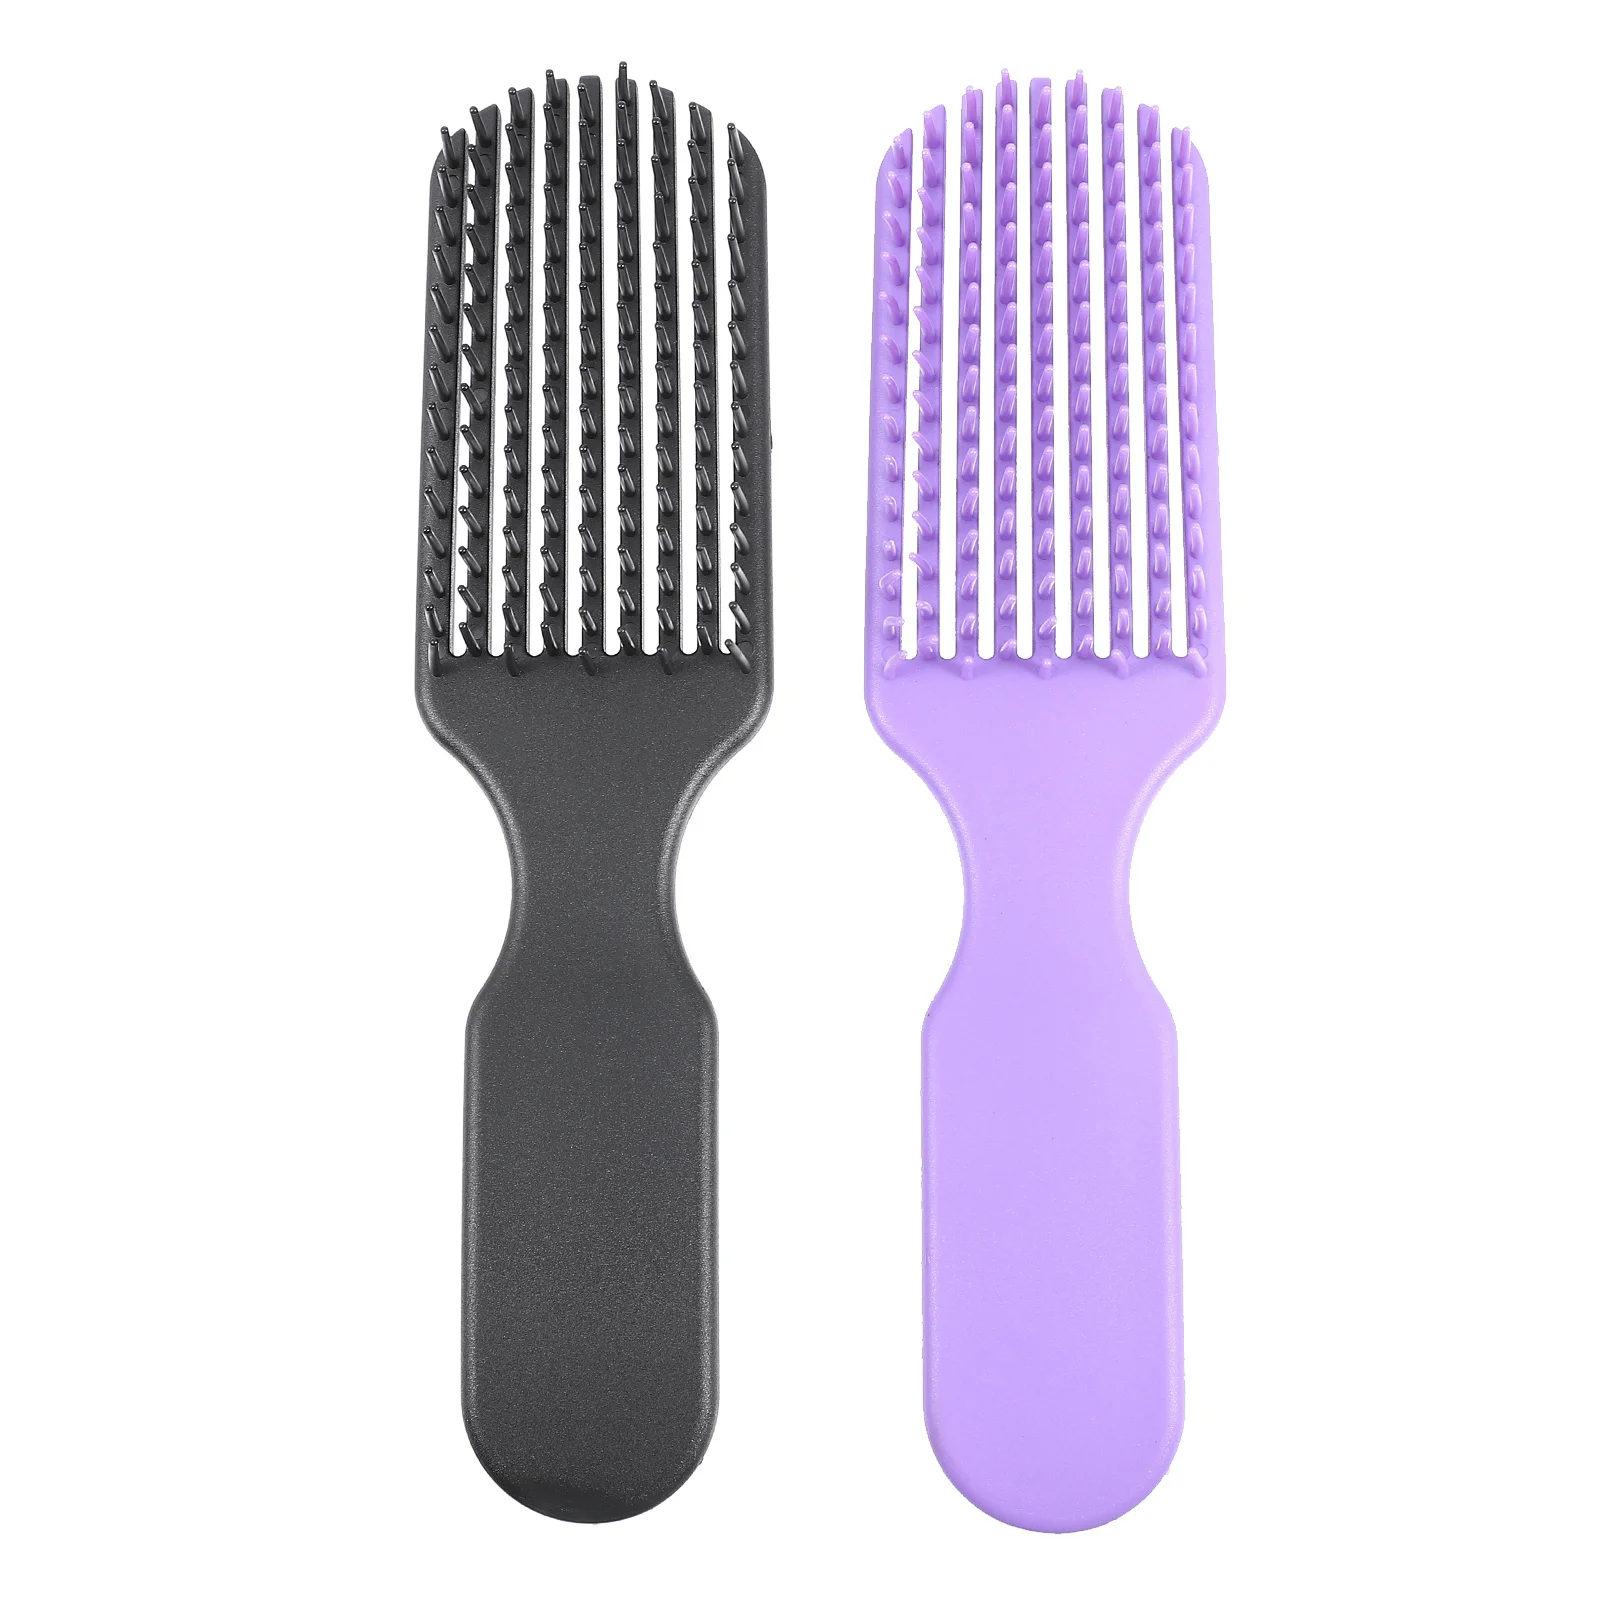 

Comb Hair Brush Styling Anti Octopus Professional Combs Barber Hairdressing Straightening Grooming Curly Wide Detangler Shower